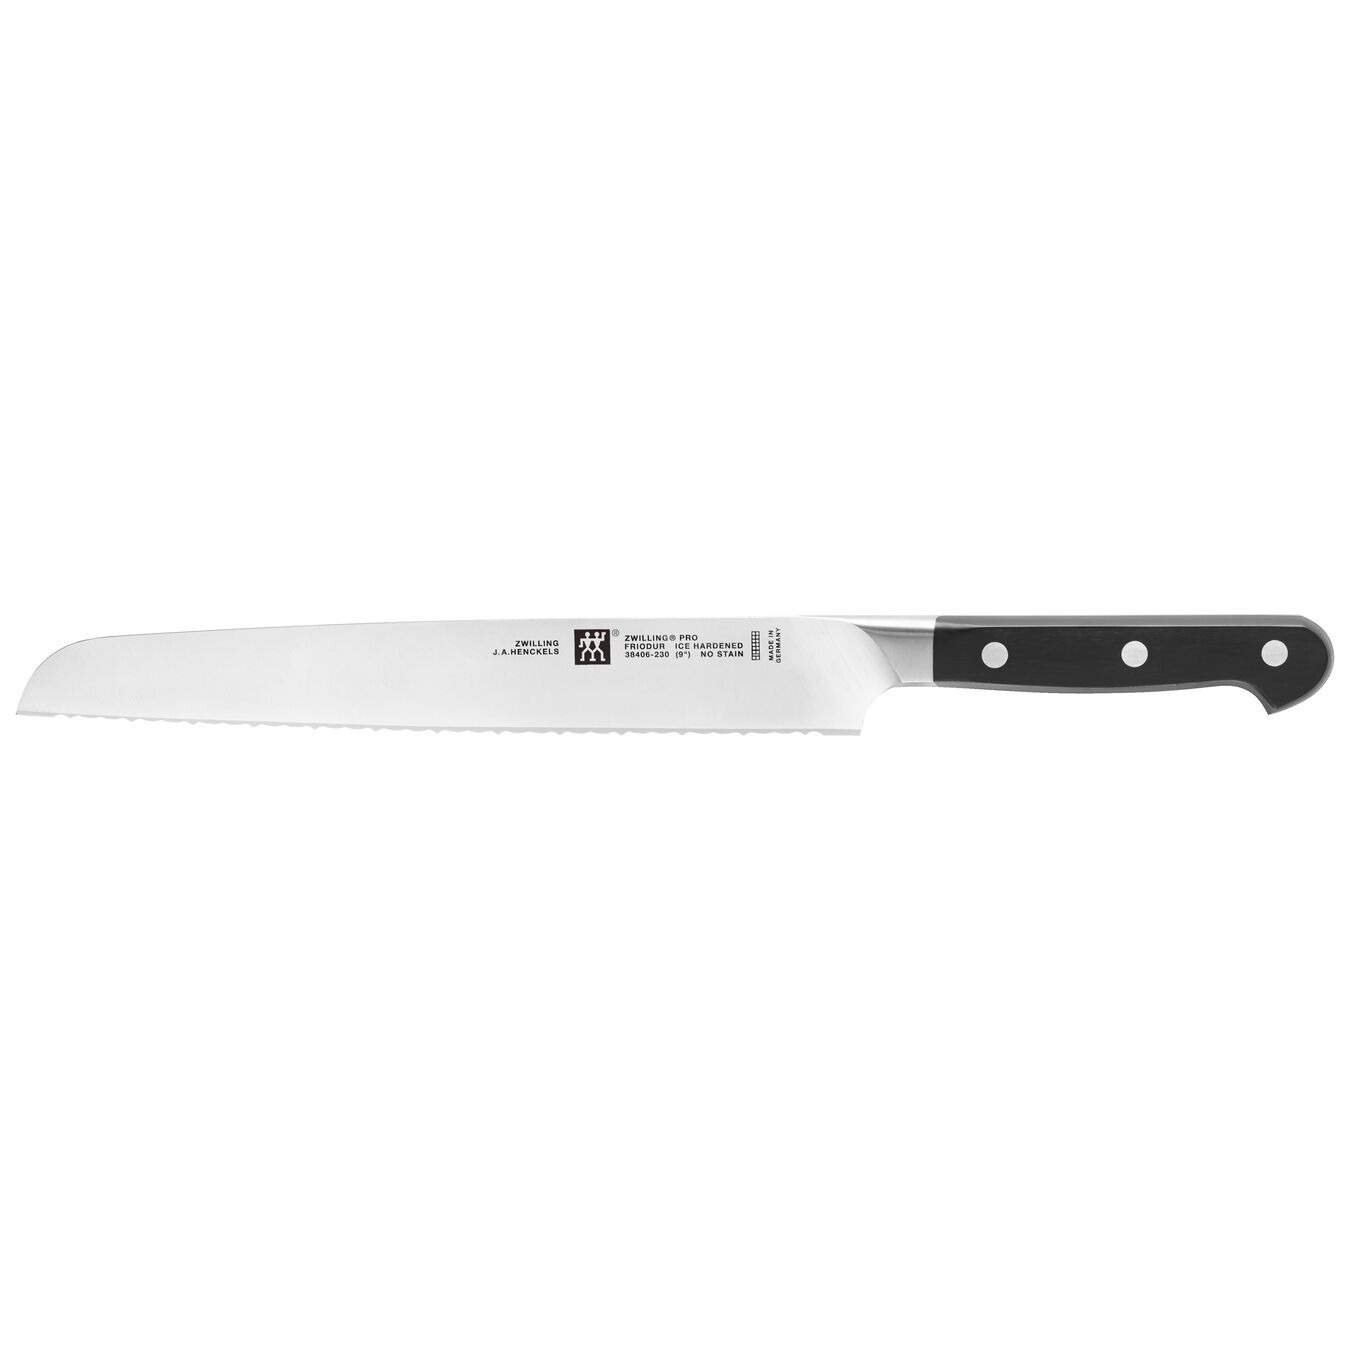 long bread knife with riveted black handle on white background